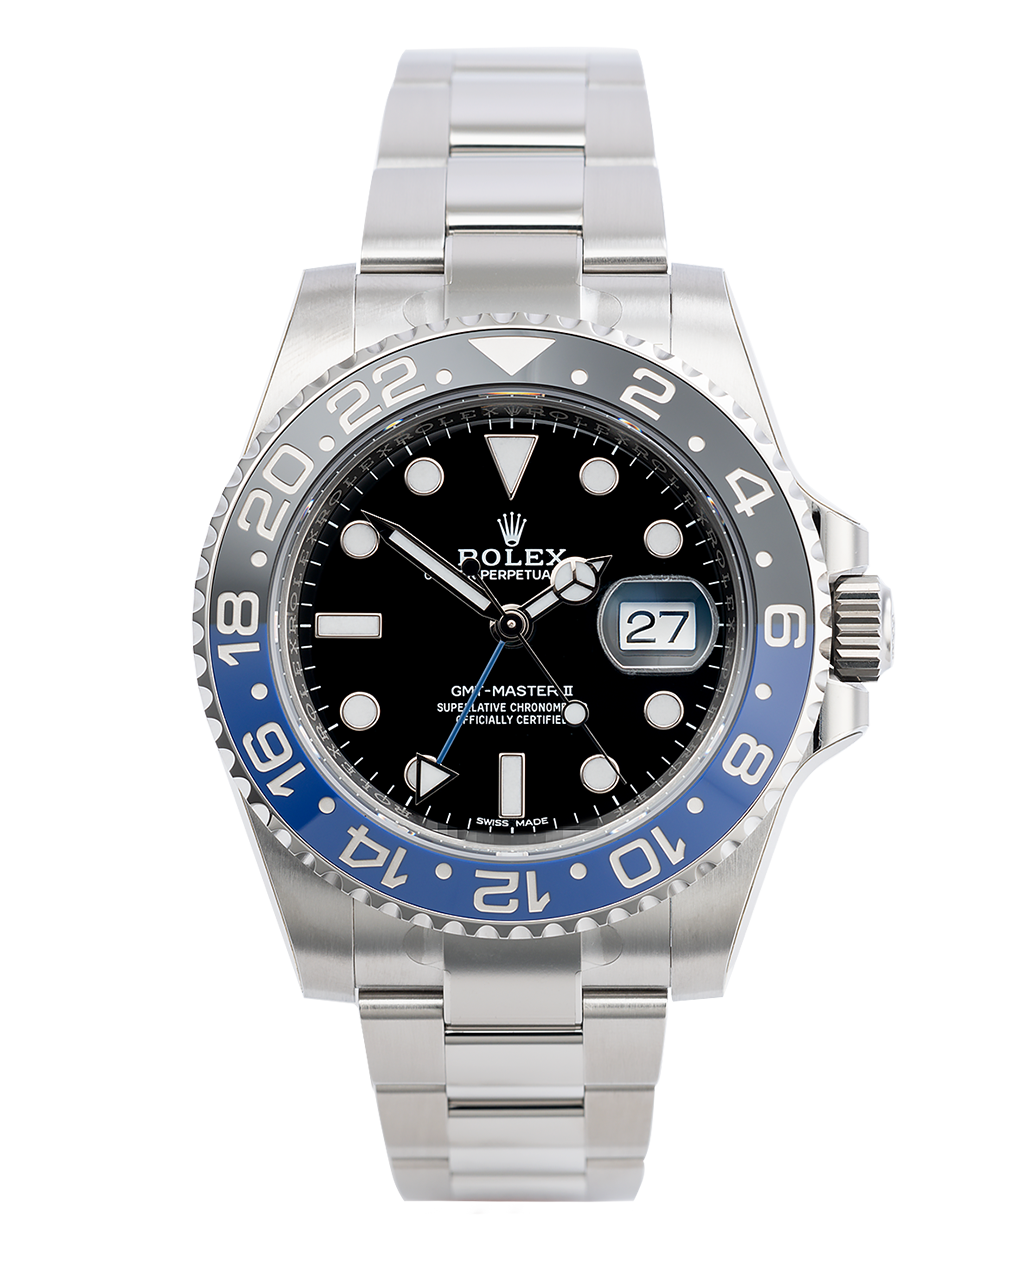 Rolex GMT-Master II Watches | ref 116710BLNR | 116710BLNR - New Old ...